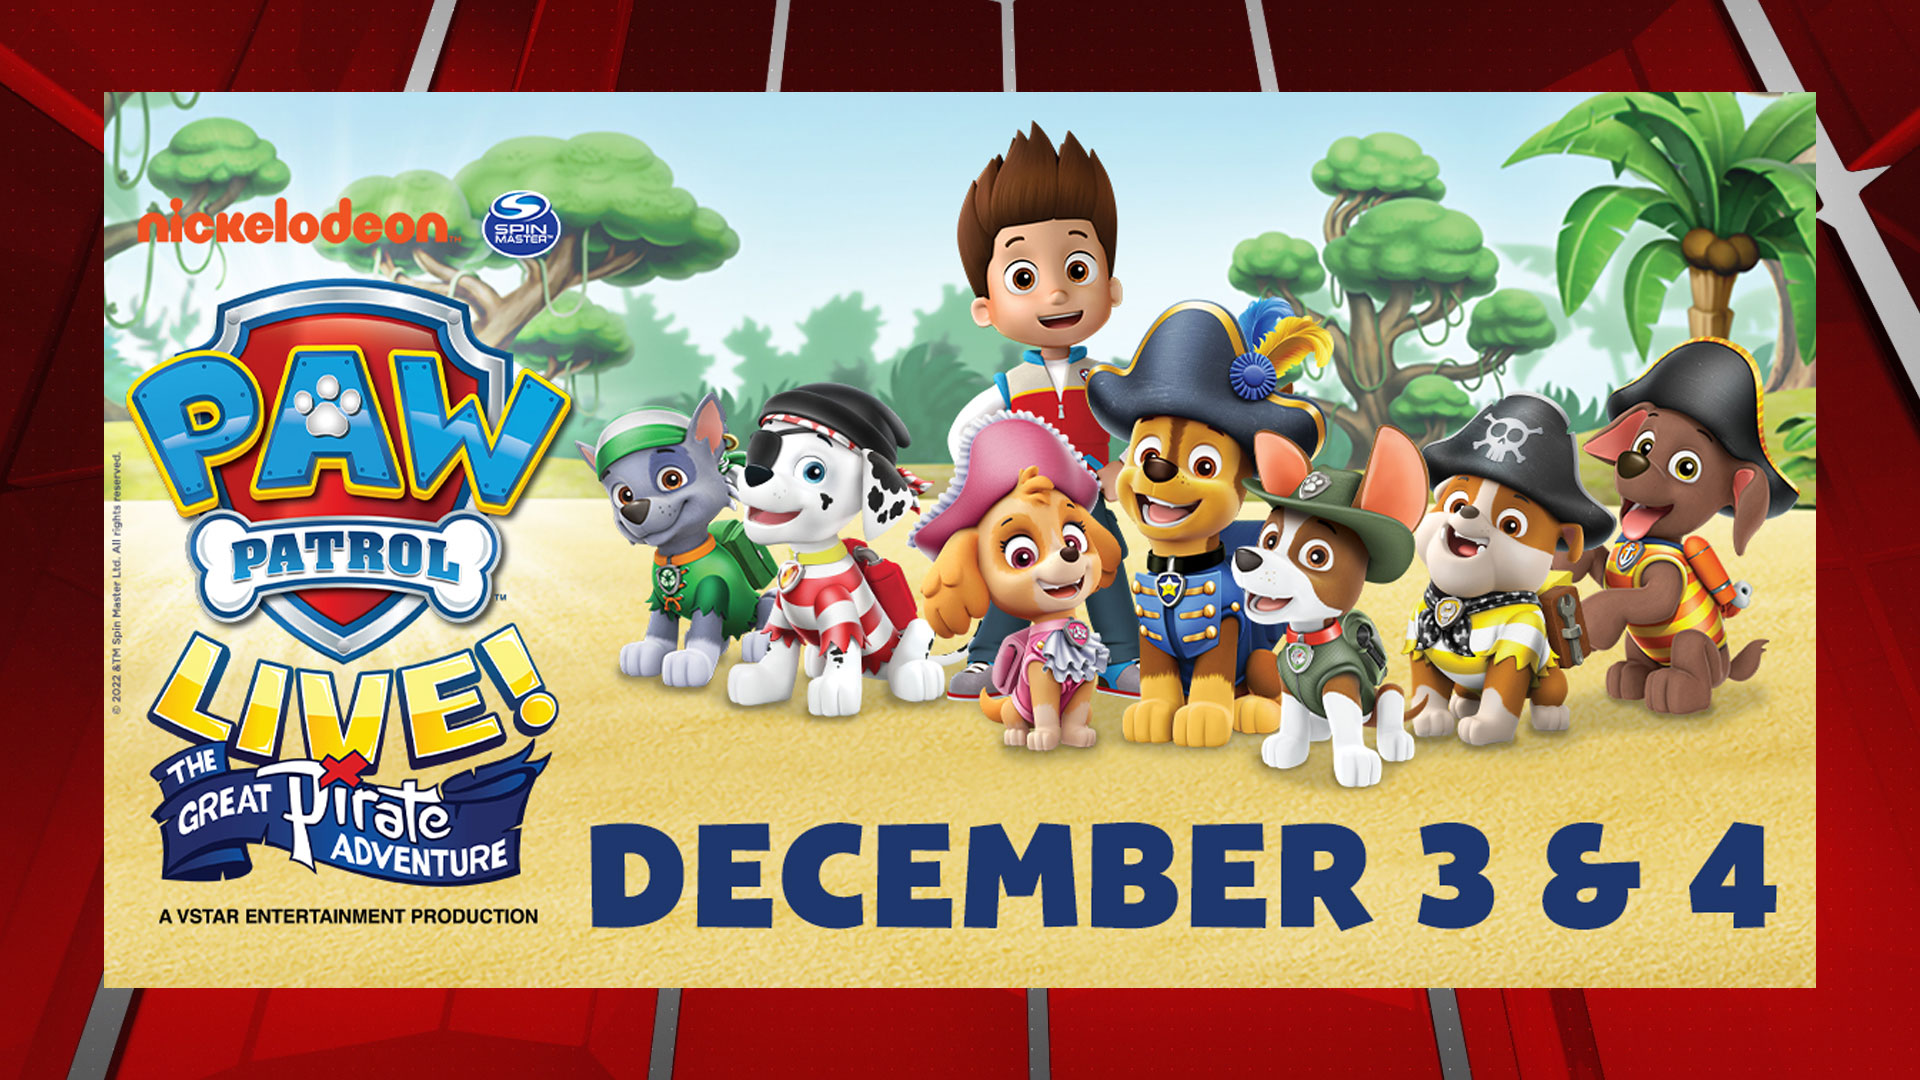 PAW Patrol Live! coming to Springfield